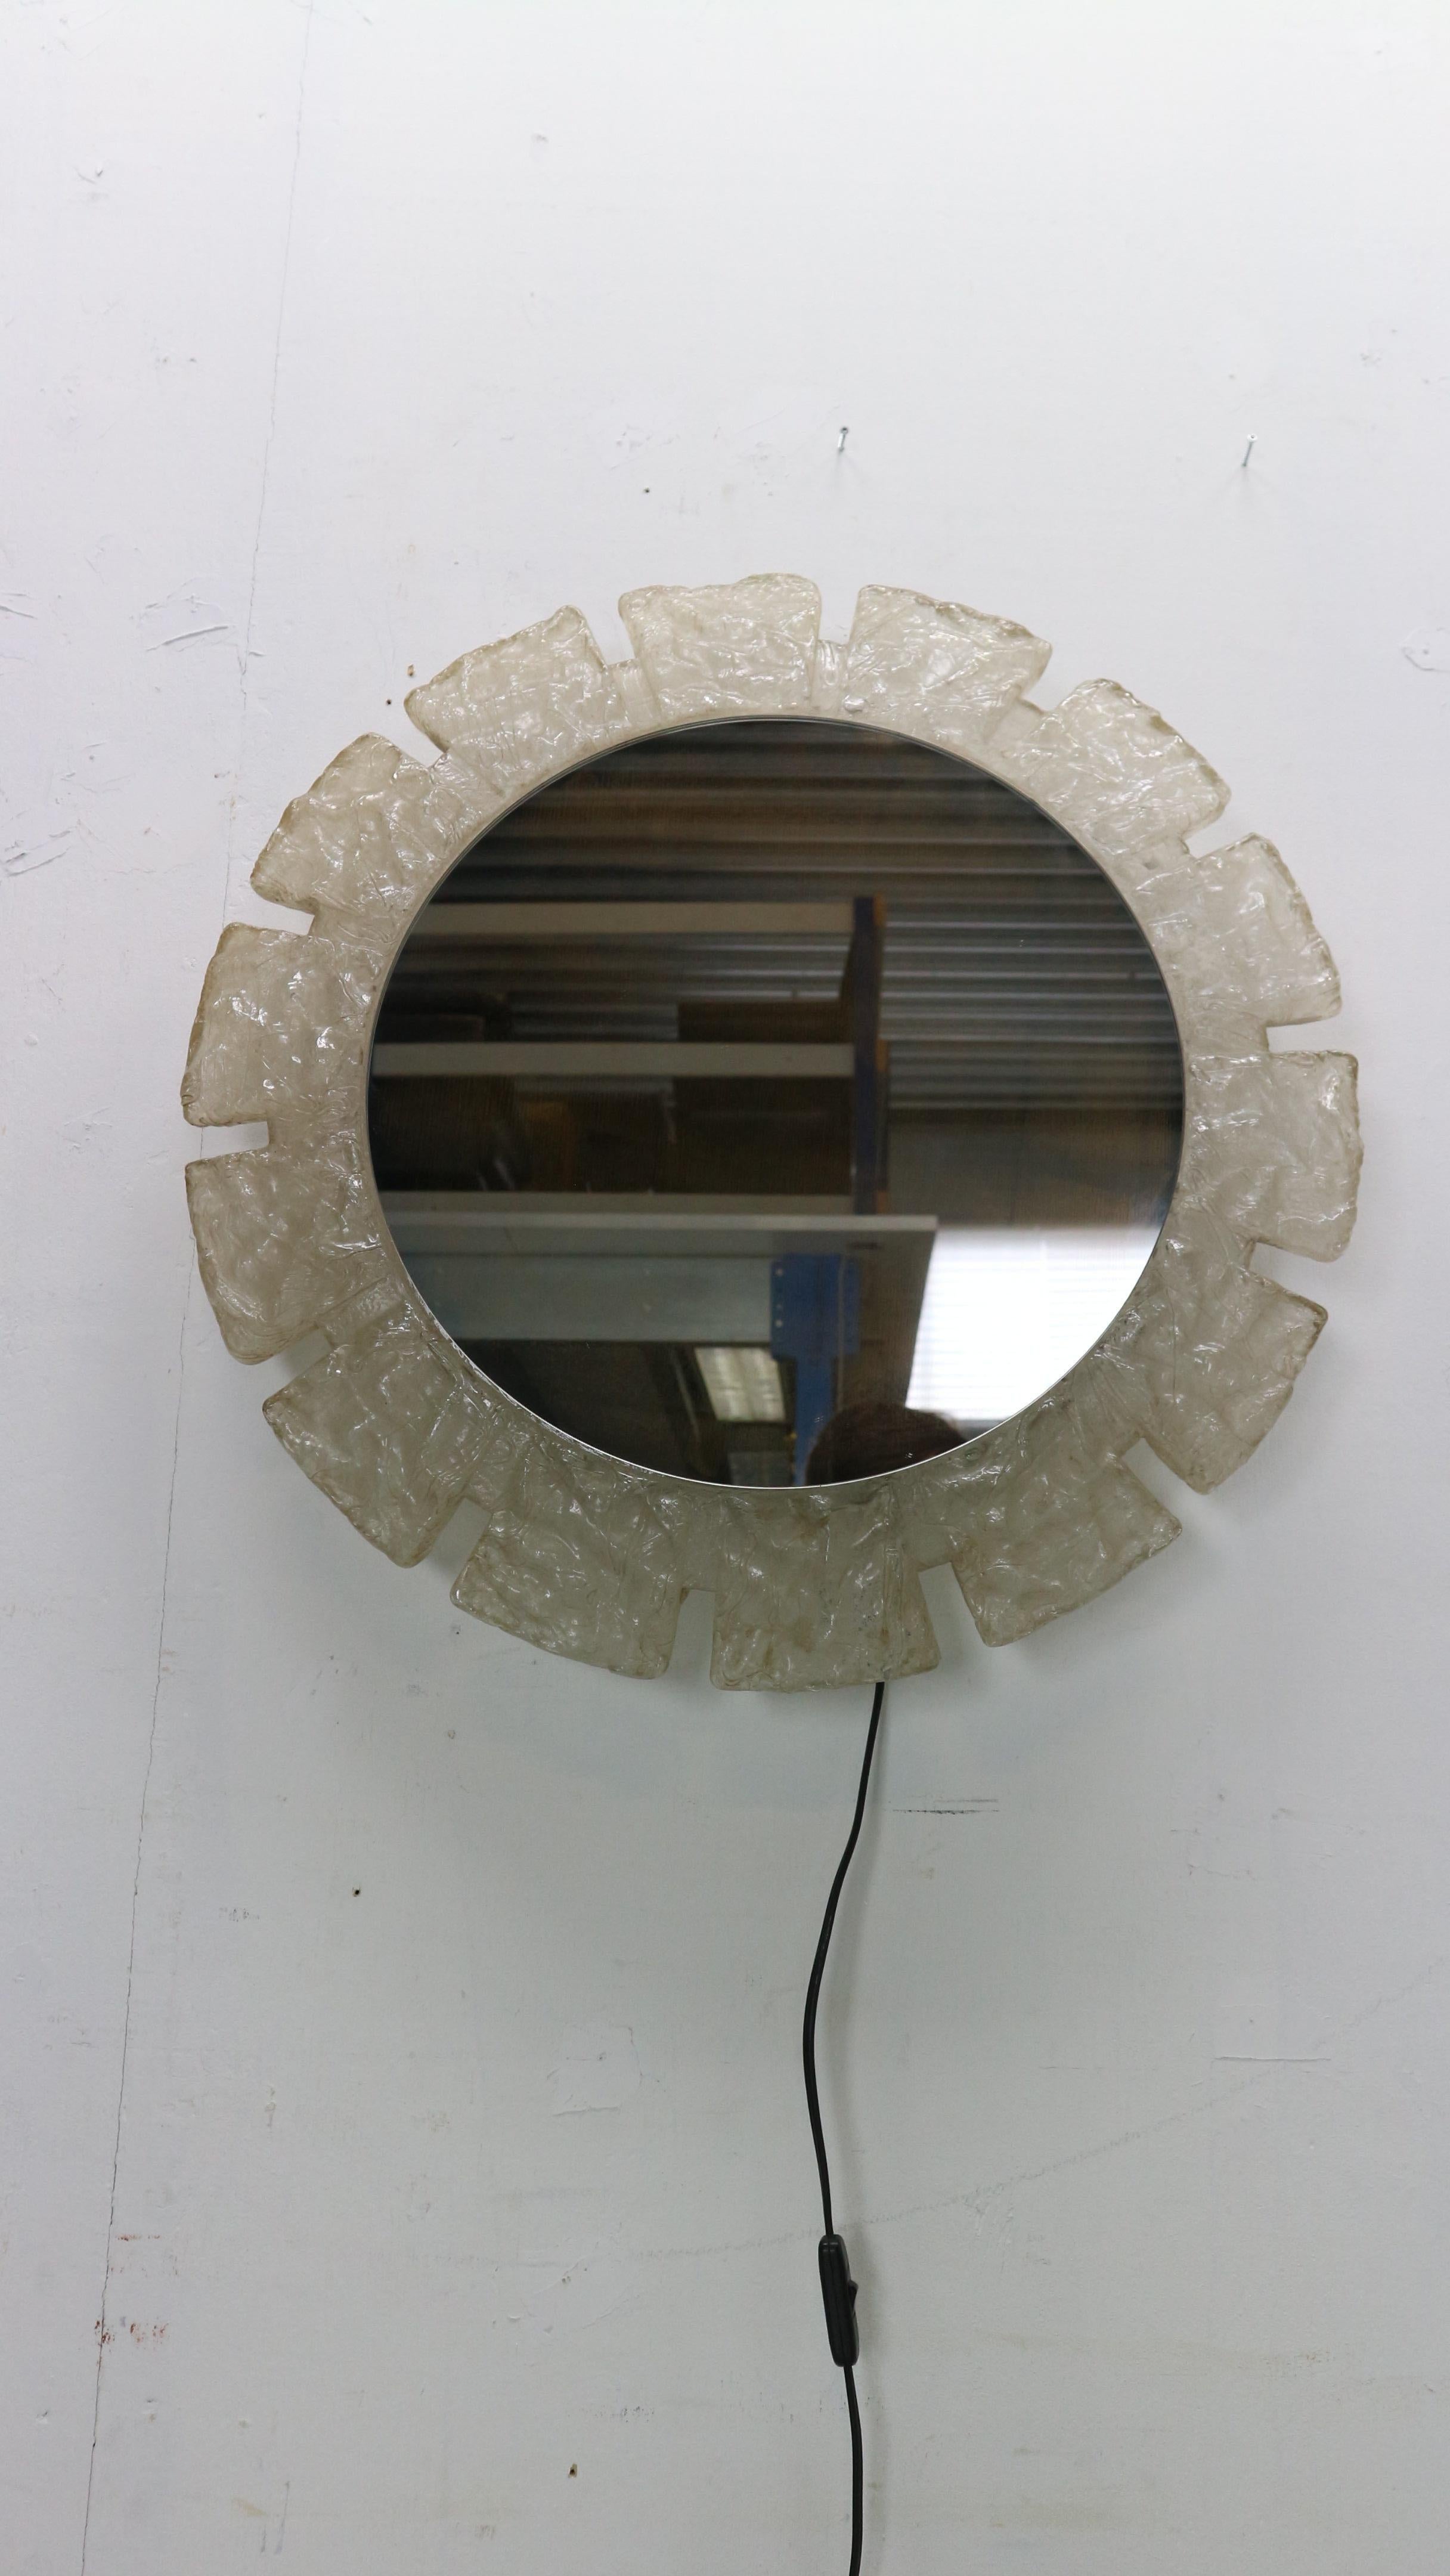 Mid-20th Century Egon Hillebrand Round Acrylic Illuminated Mirror With Lightening, 1970's Germany For Sale